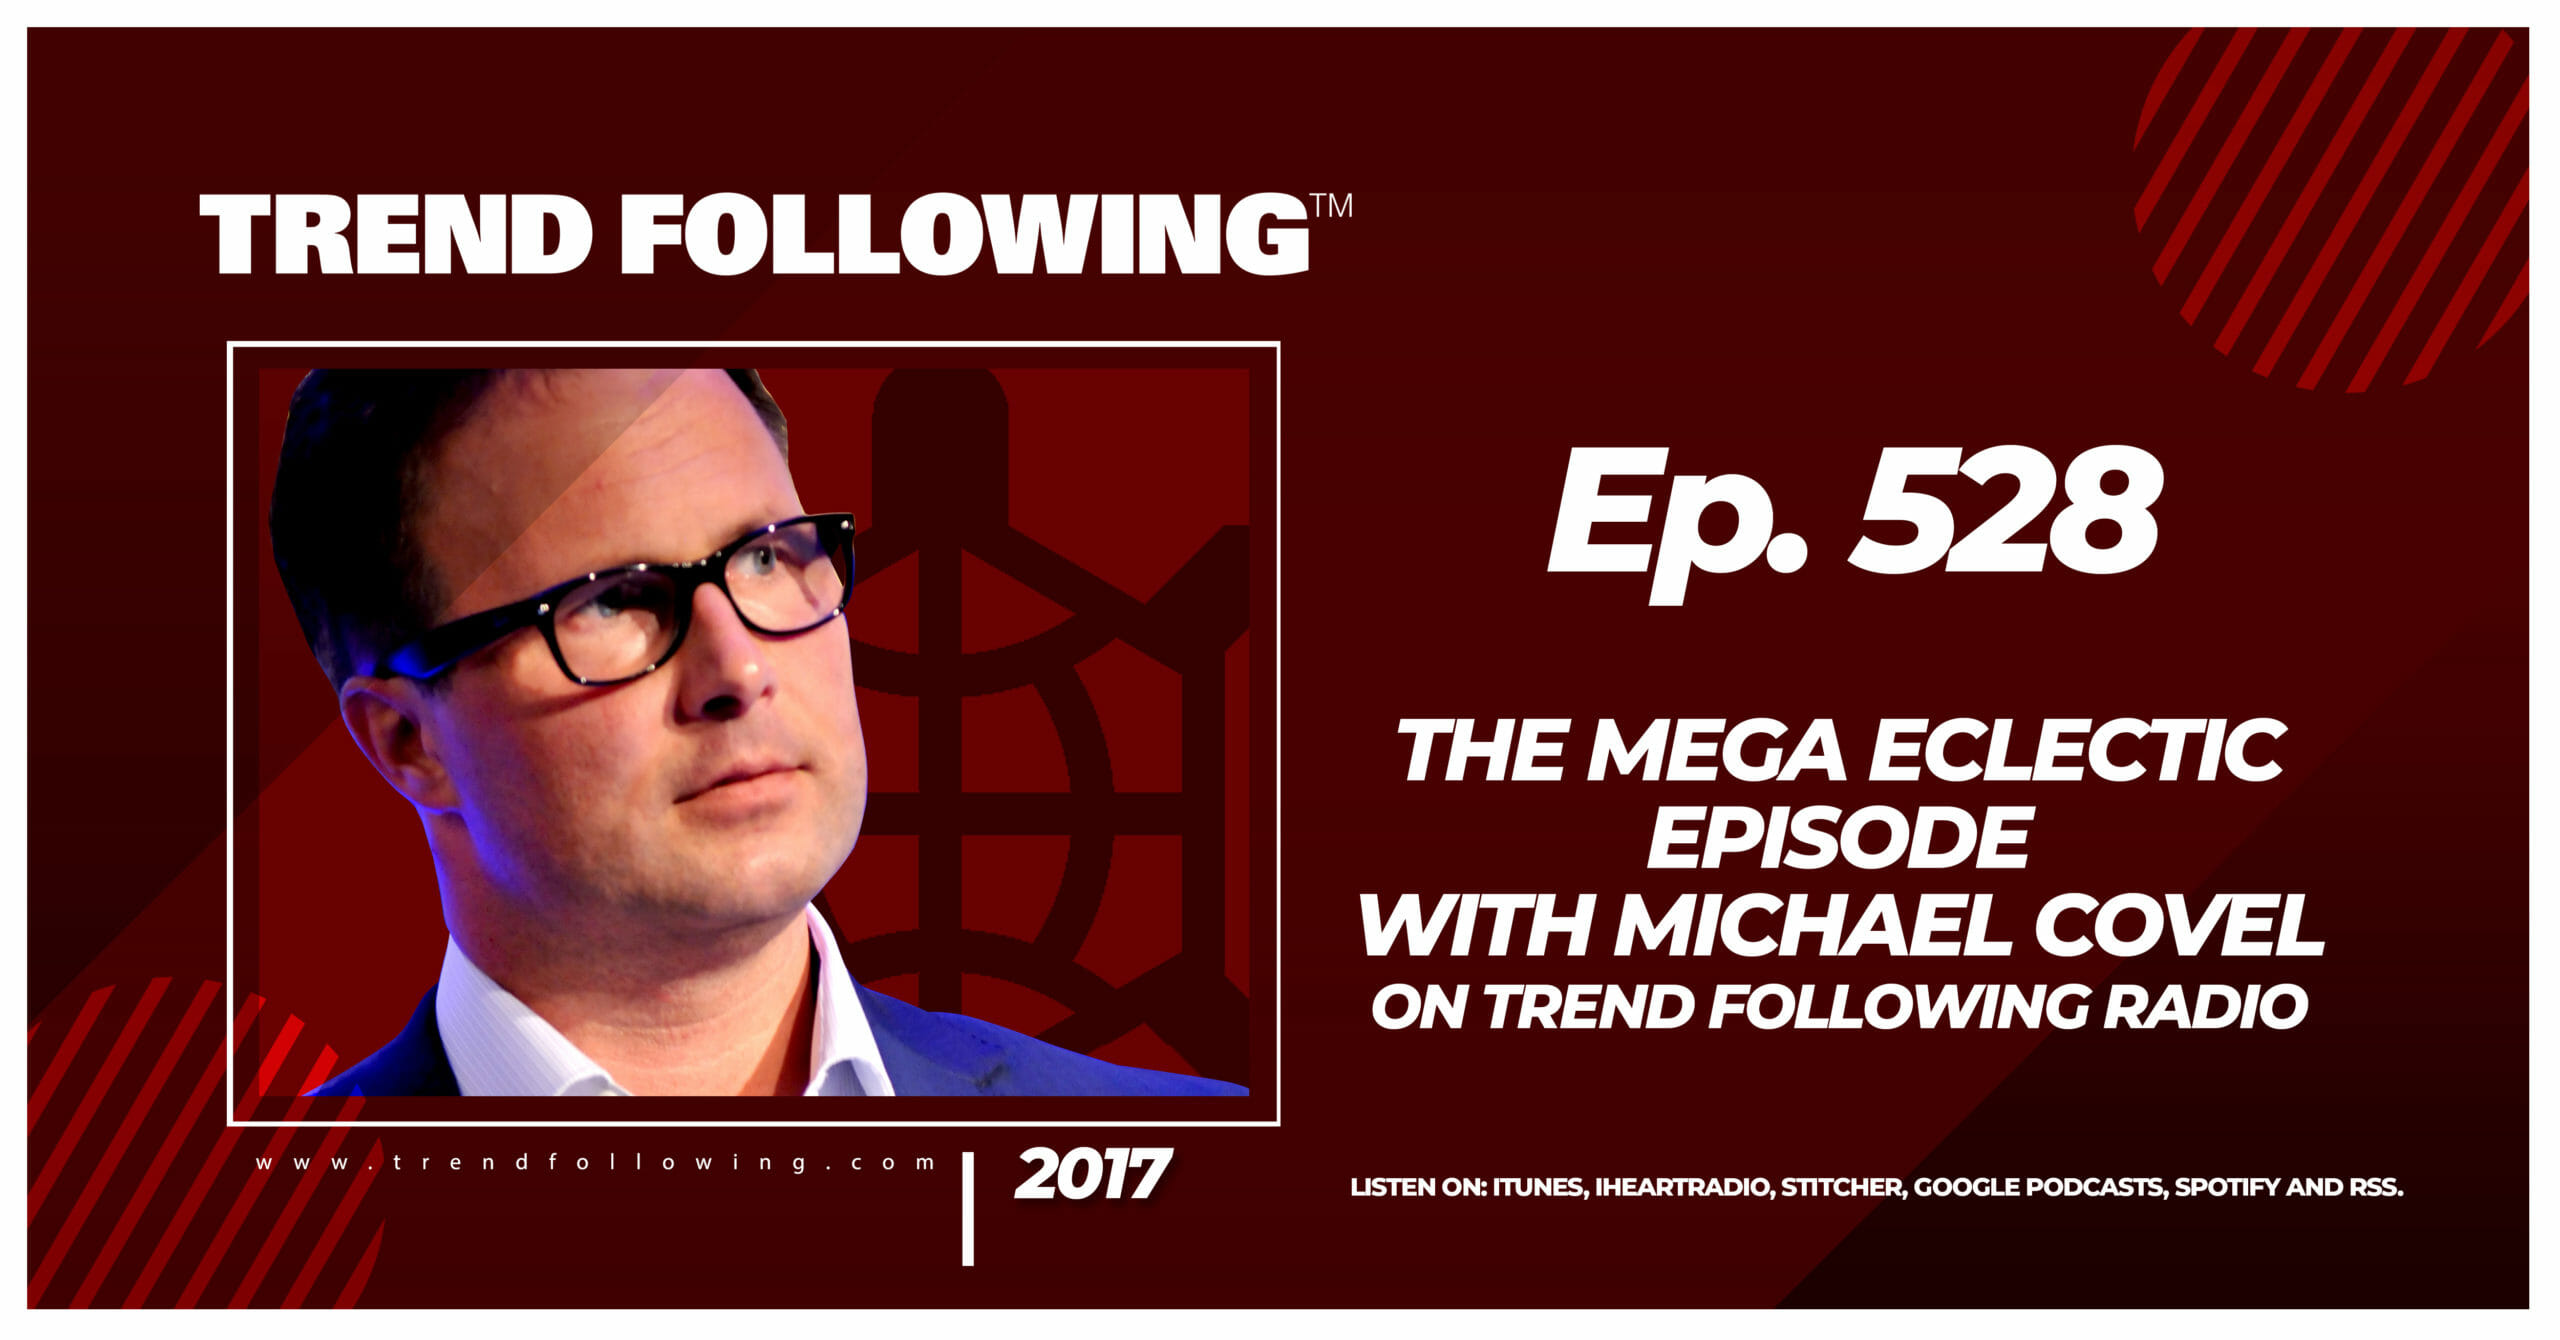 The Mega Eclectic Episode with Michael Covel on Trend Following Radio